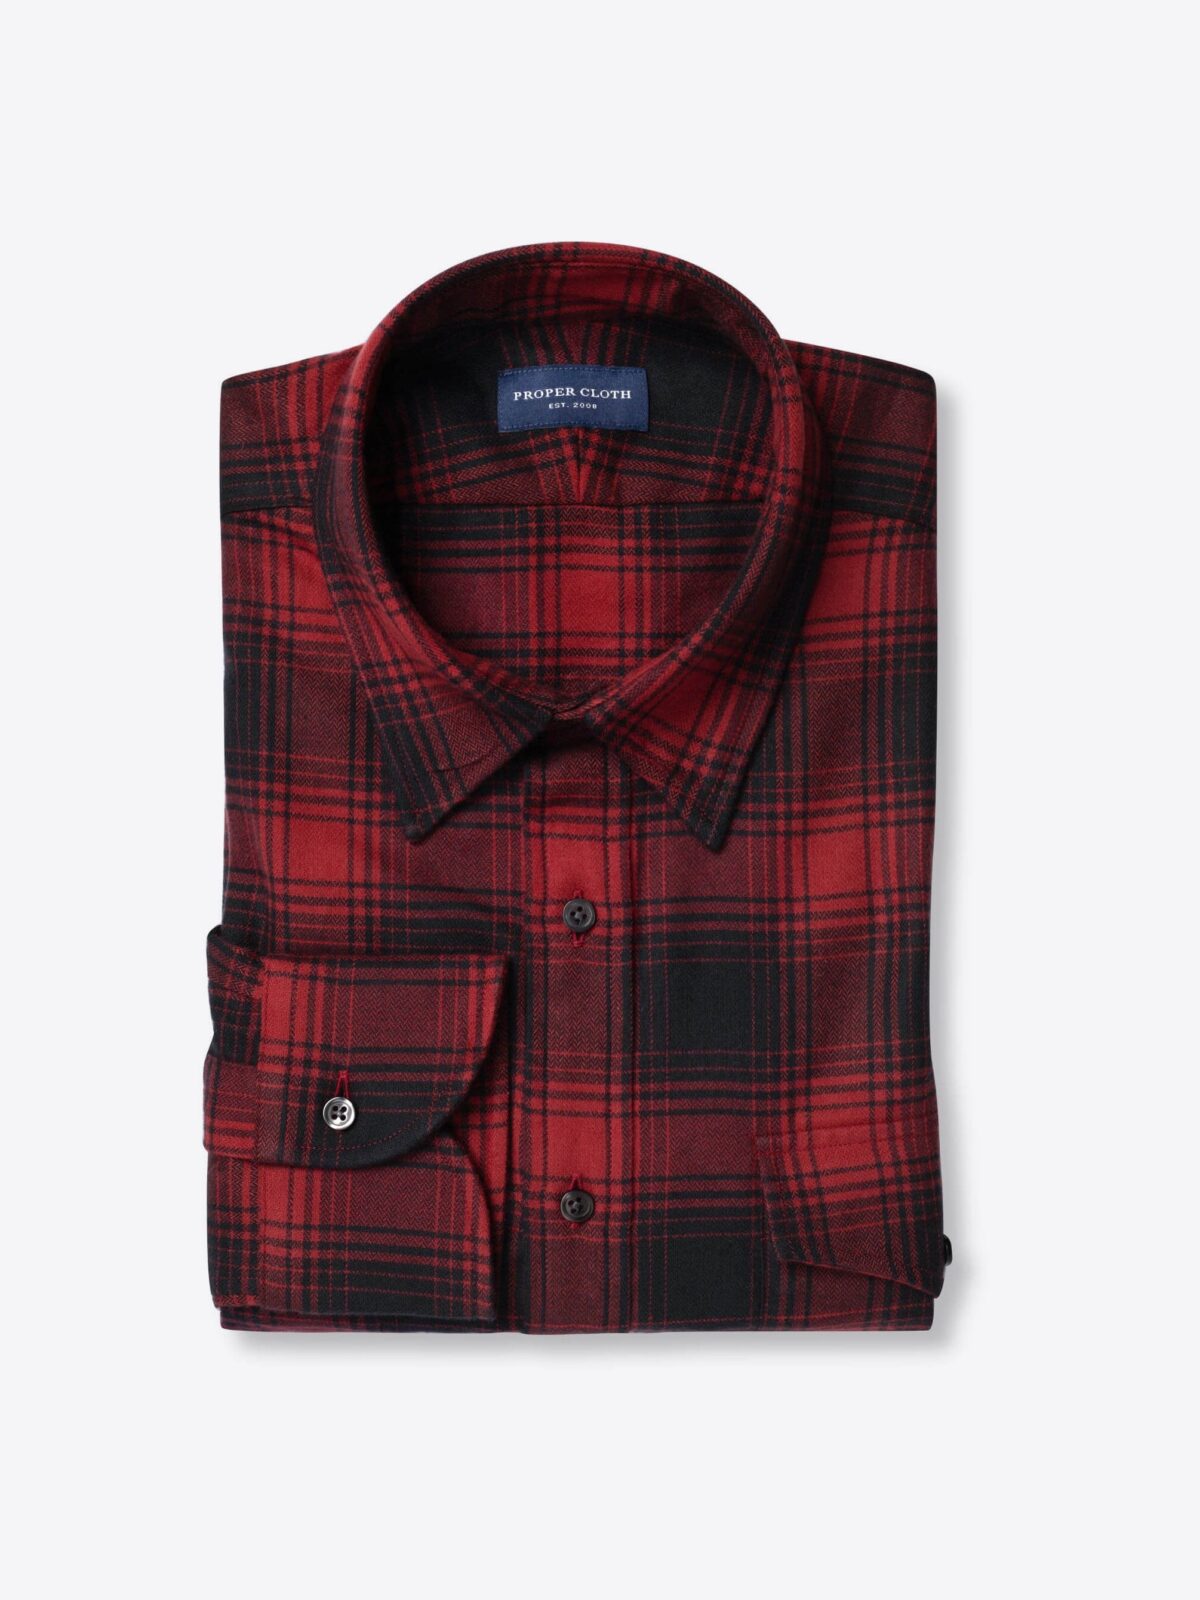 Canclini Scarlet and Black Ombre Plaid Beacon Flannel Shirt by Proper Cloth